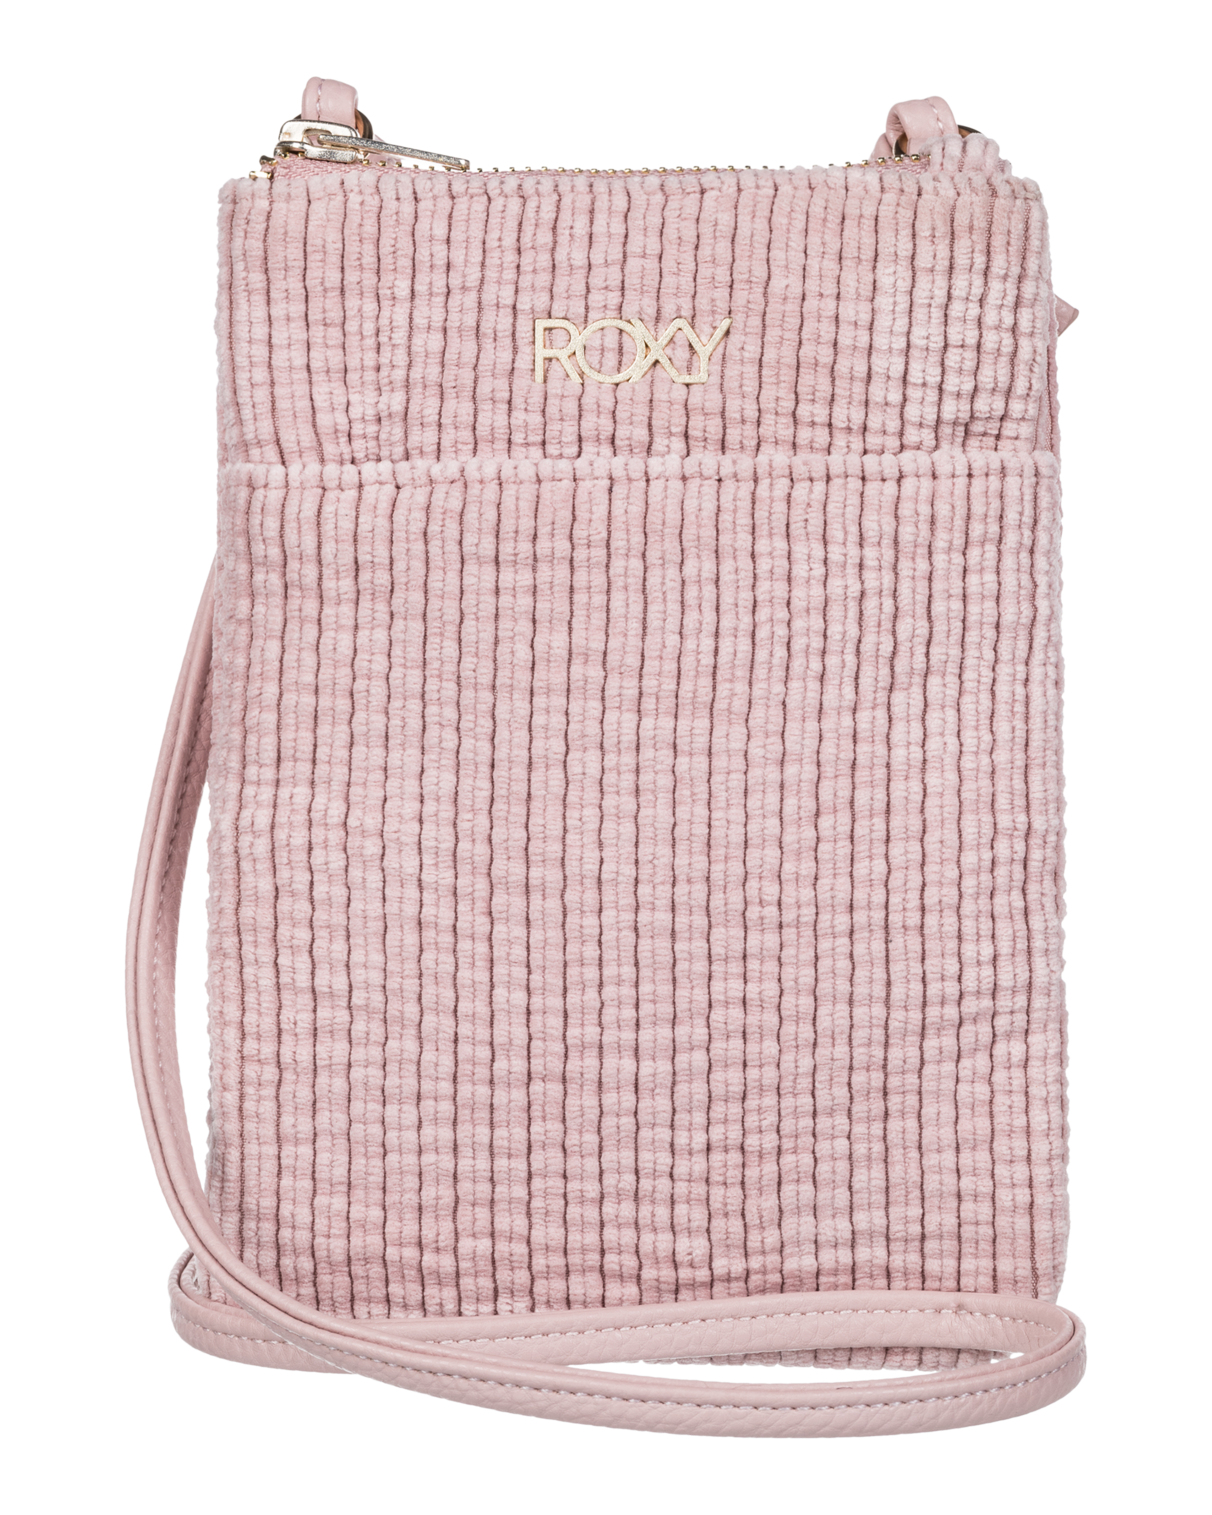 The Roxy Feeling Good Phone Bag In Pink 